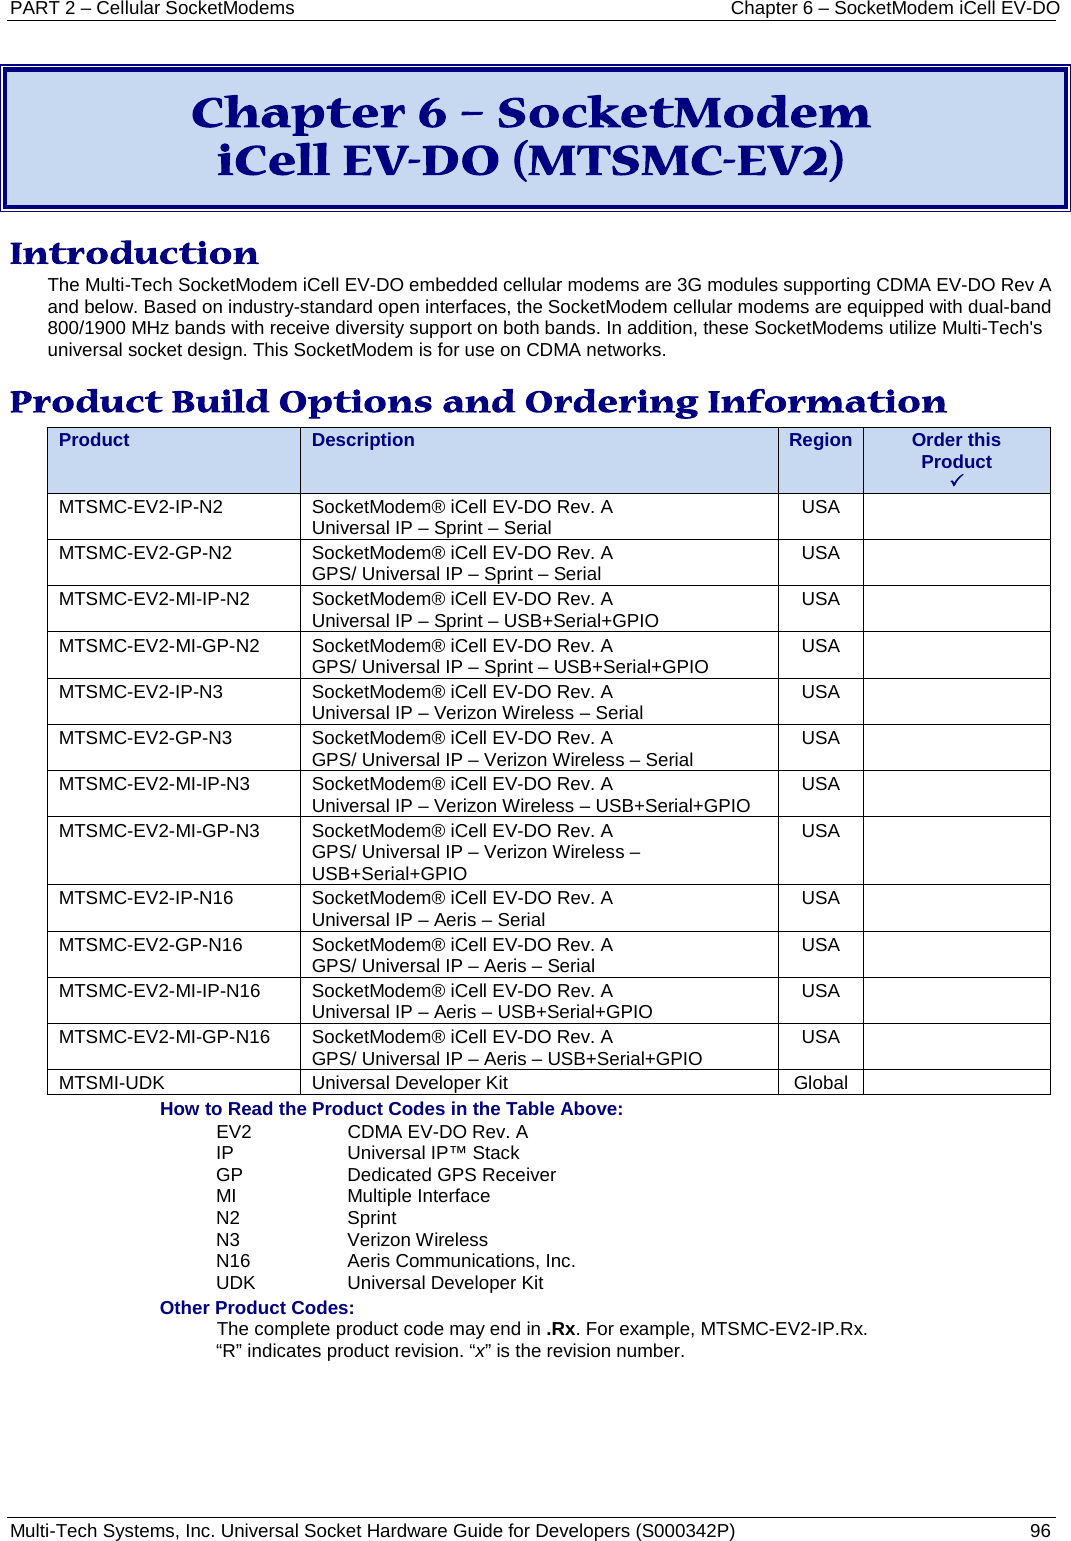 PART 2 – Cellular SocketModems Chapter 6 – SocketModem iCell EV-DO Multi-Tech Systems, Inc. Universal Socket Hardware Guide for Developers (S000342P)  96   Chapter 6 – SocketModem  iCell EV-DO (MTSMC-EV2) Introduction The Multi-Tech SocketModem iCell EV-DO embedded cellular modems are 3G modules supporting CDMA EV-DO Rev A and below. Based on industry-standard open interfaces, the SocketModem cellular modems are equipped with dual-band 800/1900 MHz bands with receive diversity support on both bands. In addition, these SocketModems utilize Multi-Tech&apos;s universal socket design. This SocketModem is for use on CDMA networks.  Product Build Options and Ordering Information Product Description Region Order this Product  MTSMC-EV2-IP-N2  SocketModem® iCell EV-DO Rev. A Universal IP – Sprint – Serial  USA   MTSMC-EV2-GP-N2  SocketModem® iCell EV-DO Rev. A GPS/ Universal IP – Sprint – Serial USA   MTSMC-EV2-MI-IP-N2  SocketModem® iCell EV-DO Rev. A Universal IP – Sprint – USB+Serial+GPIO USA   MTSMC-EV2-MI-GP-N2  SocketModem® iCell EV-DO Rev. A GPS/ Universal IP – Sprint – USB+Serial+GPIO USA   MTSMC-EV2-IP-N3 SocketModem® iCell EV-DO Rev. A Universal IP – Verizon Wireless – Serial USA   MTSMC-EV2-GP-N3 SocketModem® iCell EV-DO Rev. A GPS/ Universal IP – Verizon Wireless – Serial USA   MTSMC-EV2-MI-IP-N3 SocketModem® iCell EV-DO Rev. A Universal IP – Verizon Wireless – USB+Serial+GPIO USA   MTSMC-EV2-MI-GP-N3 SocketModem® iCell EV-DO Rev. A GPS/ Universal IP – Verizon Wireless – USB+Serial+GPIO USA   MTSMC-EV2-IP-N16  SocketModem® iCell EV-DO Rev. A Universal IP – Aeris – Serial USA   MTSMC-EV2-GP-N16 SocketModem® iCell EV-DO Rev. A GPS/ Universal IP – Aeris – Serial USA   MTSMC-EV2-MI-IP-N16 SocketModem® iCell EV-DO Rev. A Universal IP – Aeris – USB+Serial+GPIO USA   MTSMC-EV2-MI-GP-N16 SocketModem® iCell EV-DO Rev. A GPS/ Universal IP – Aeris – USB+Serial+GPIO USA   MTSMI-UDK Universal Developer Kit Global  How to Read the Product Codes in the Table Above: EV2  CDMA EV-DO Rev. A IP Universal IP™ Stack GP Dedicated GPS Receiver MI Multiple Interface N2  Sprint N3  Verizon Wireless N16  Aeris Communications, Inc. UDK Universal Developer Kit Other Product Codes: The complete product code may end in .Rx. For example, MTSMC-EV2-IP.Rx.  “R” indicates product revision. “x” is the revision number.    